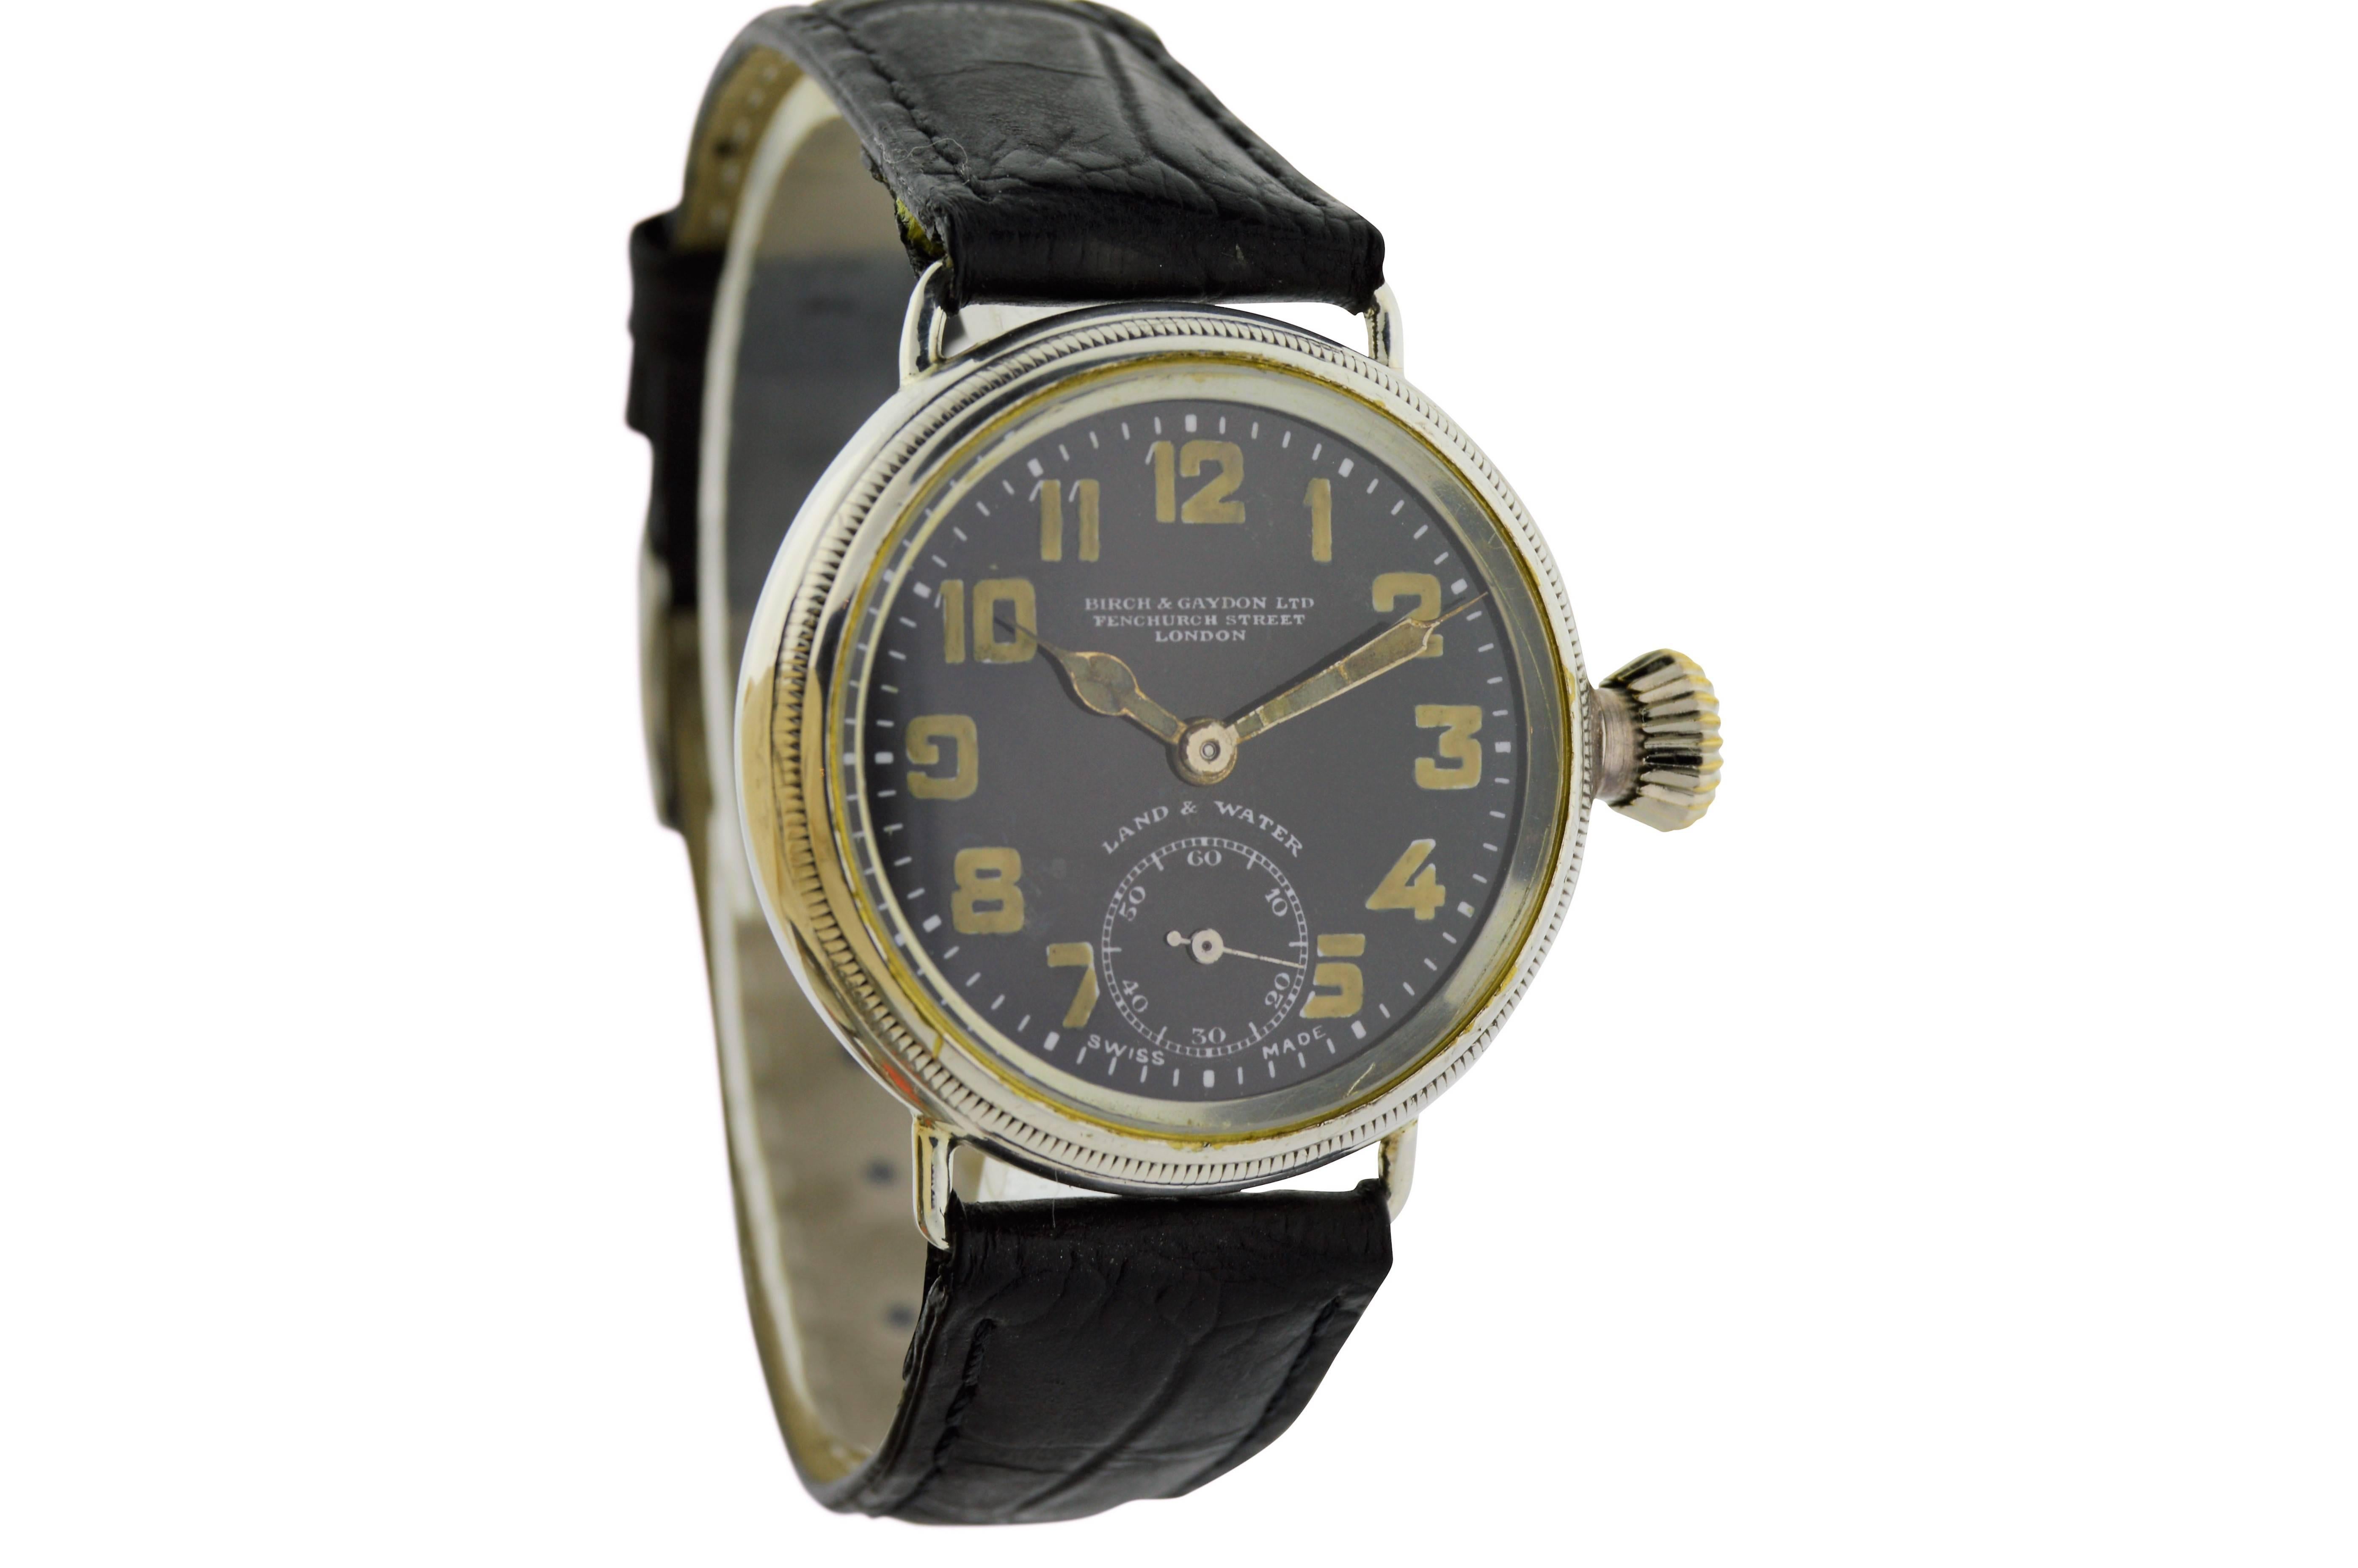 FACTORY / HOUSE: Zenith for Birch & Gaydon Ltd.
STYLE / REFERENCE: Military WW I 
METAL / MATERIAL: Sterling Silver
DIMENSIONS: Length 39mm  X Diameter 36mm
CIRCA: 1915 
MOVEMENT / CALIBER: Manual Winding / 15 Jewels / Gilt Plates
DIAL / HANDS: